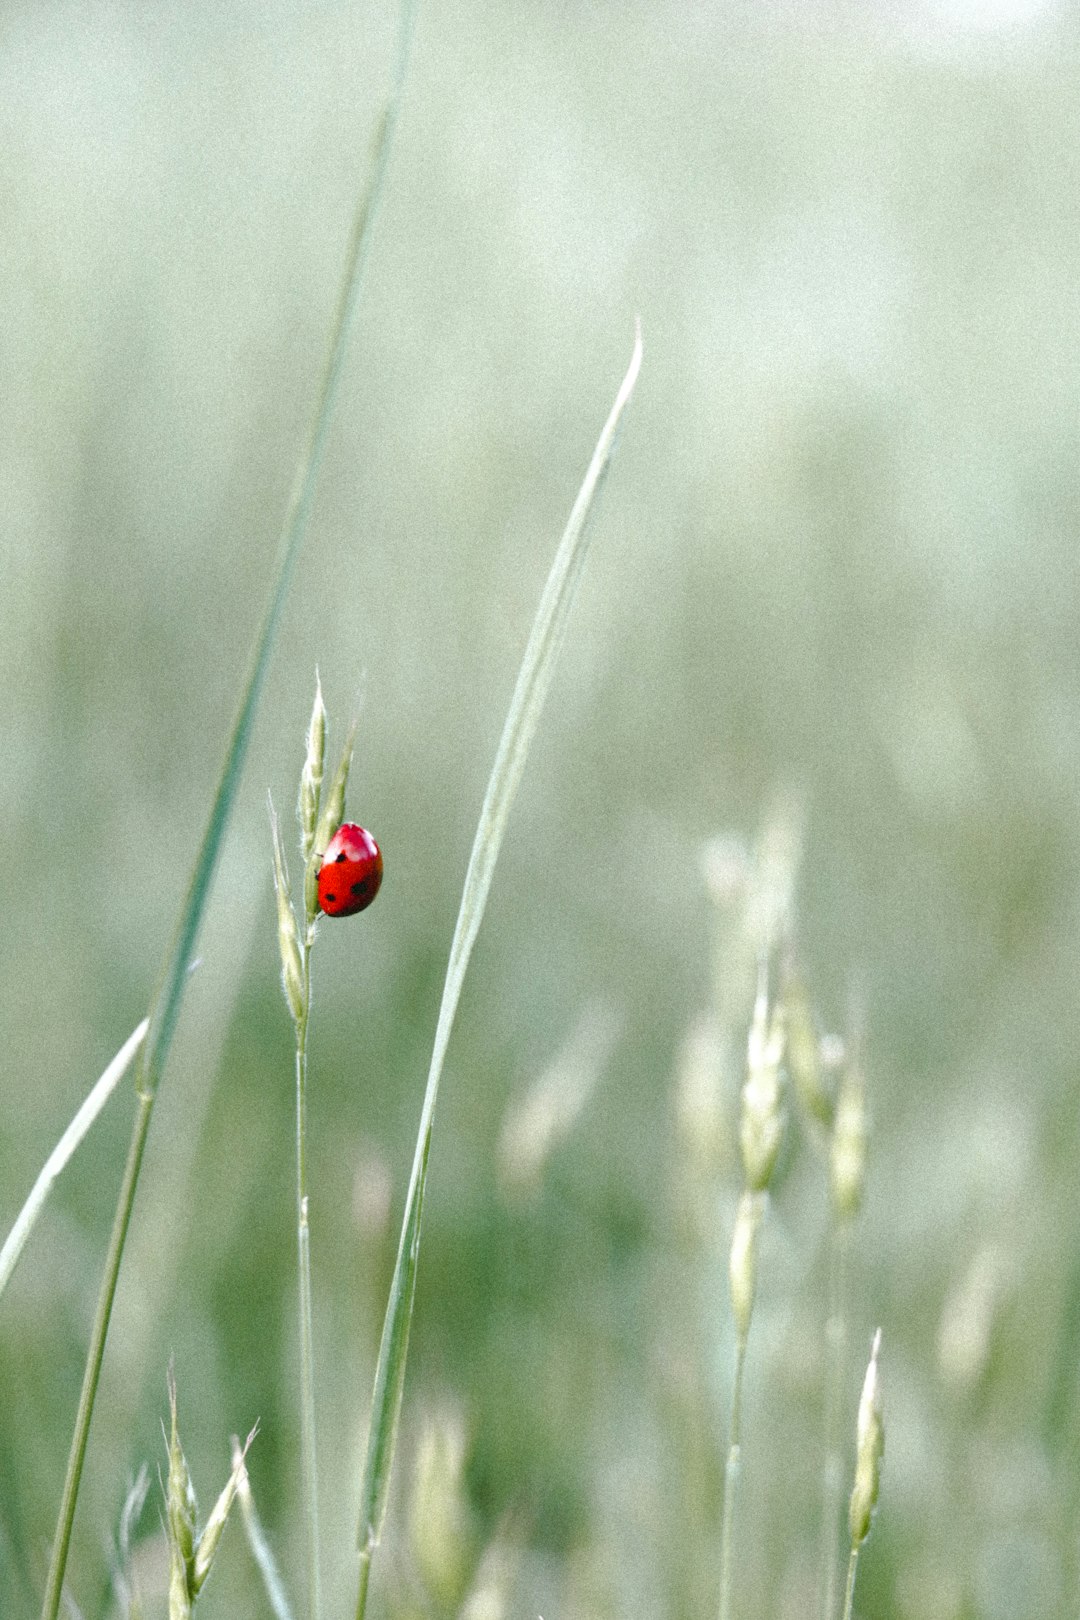 red ladybug on green grass during daytime